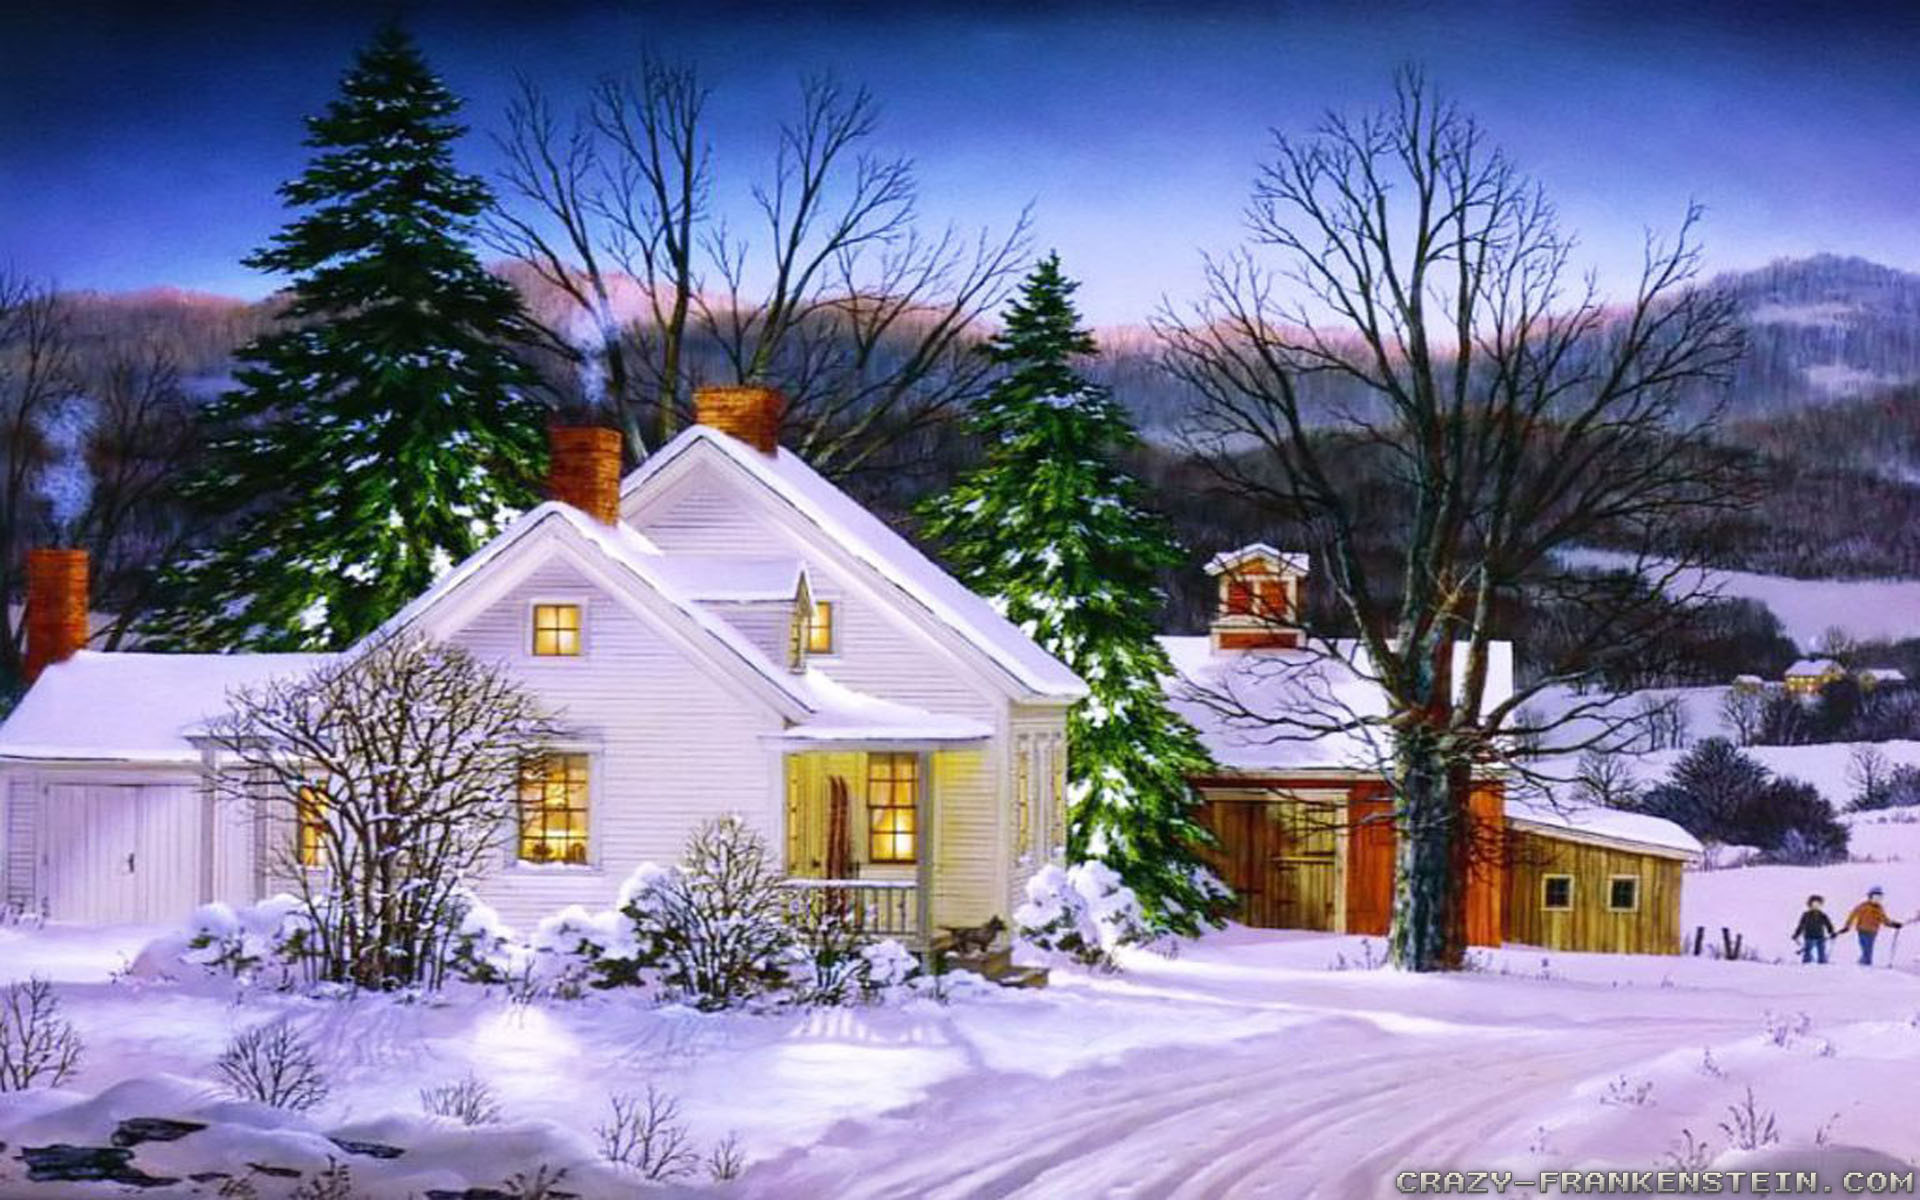 1920x1200 Wallpaper: One Winter Christmas wallpapers. Resolution: 1024x768 |  1280x1024 | 1600x1200. Widescreen Res: 1440x900 | 1680x1050 | 